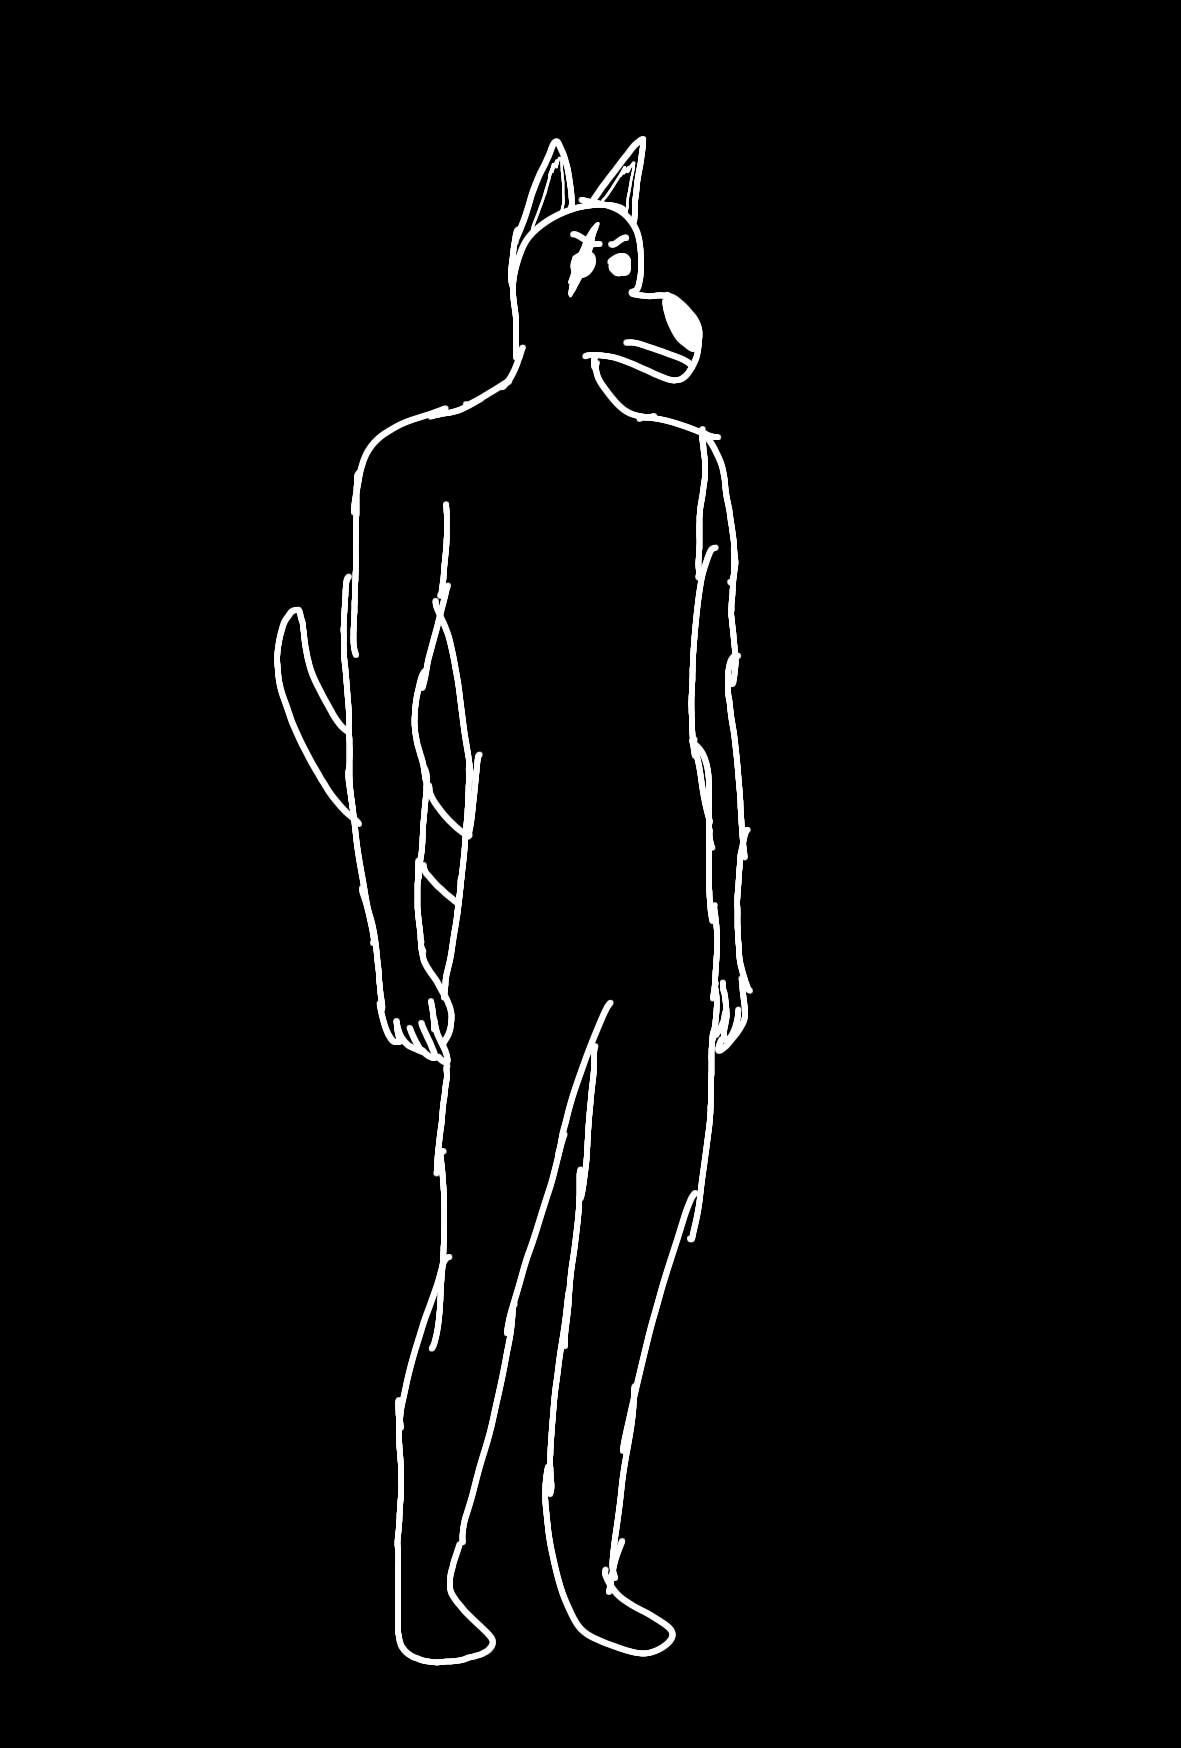 As seen on page two, the shadowy man in his black and white glory (shadow form)